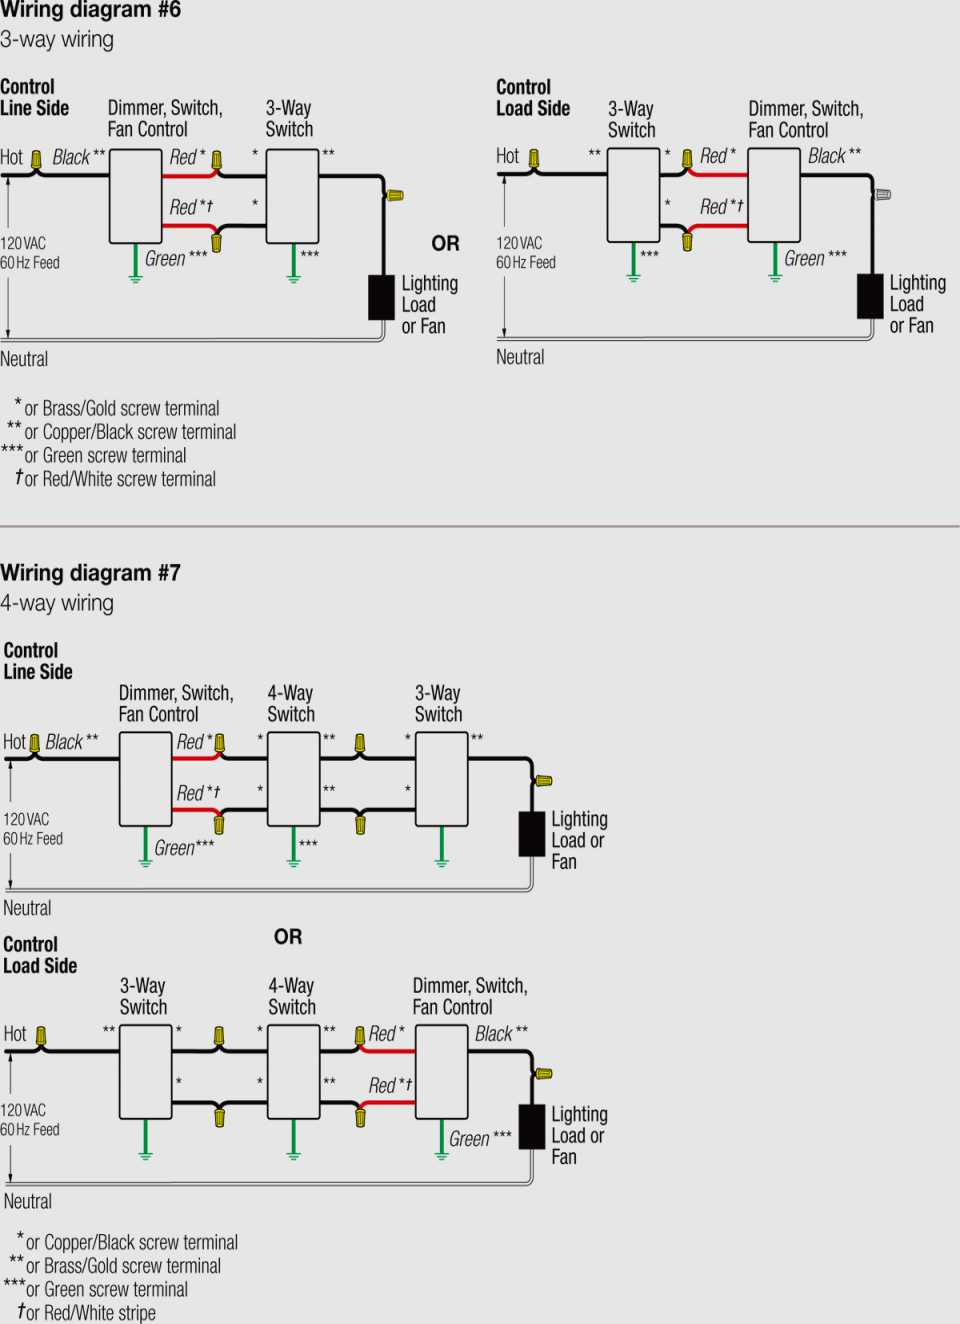 Lutron 3 Way Switch Wiring Diagram Lutron Dimmer 3 Way Switch Wiring Diagram Wiring Library